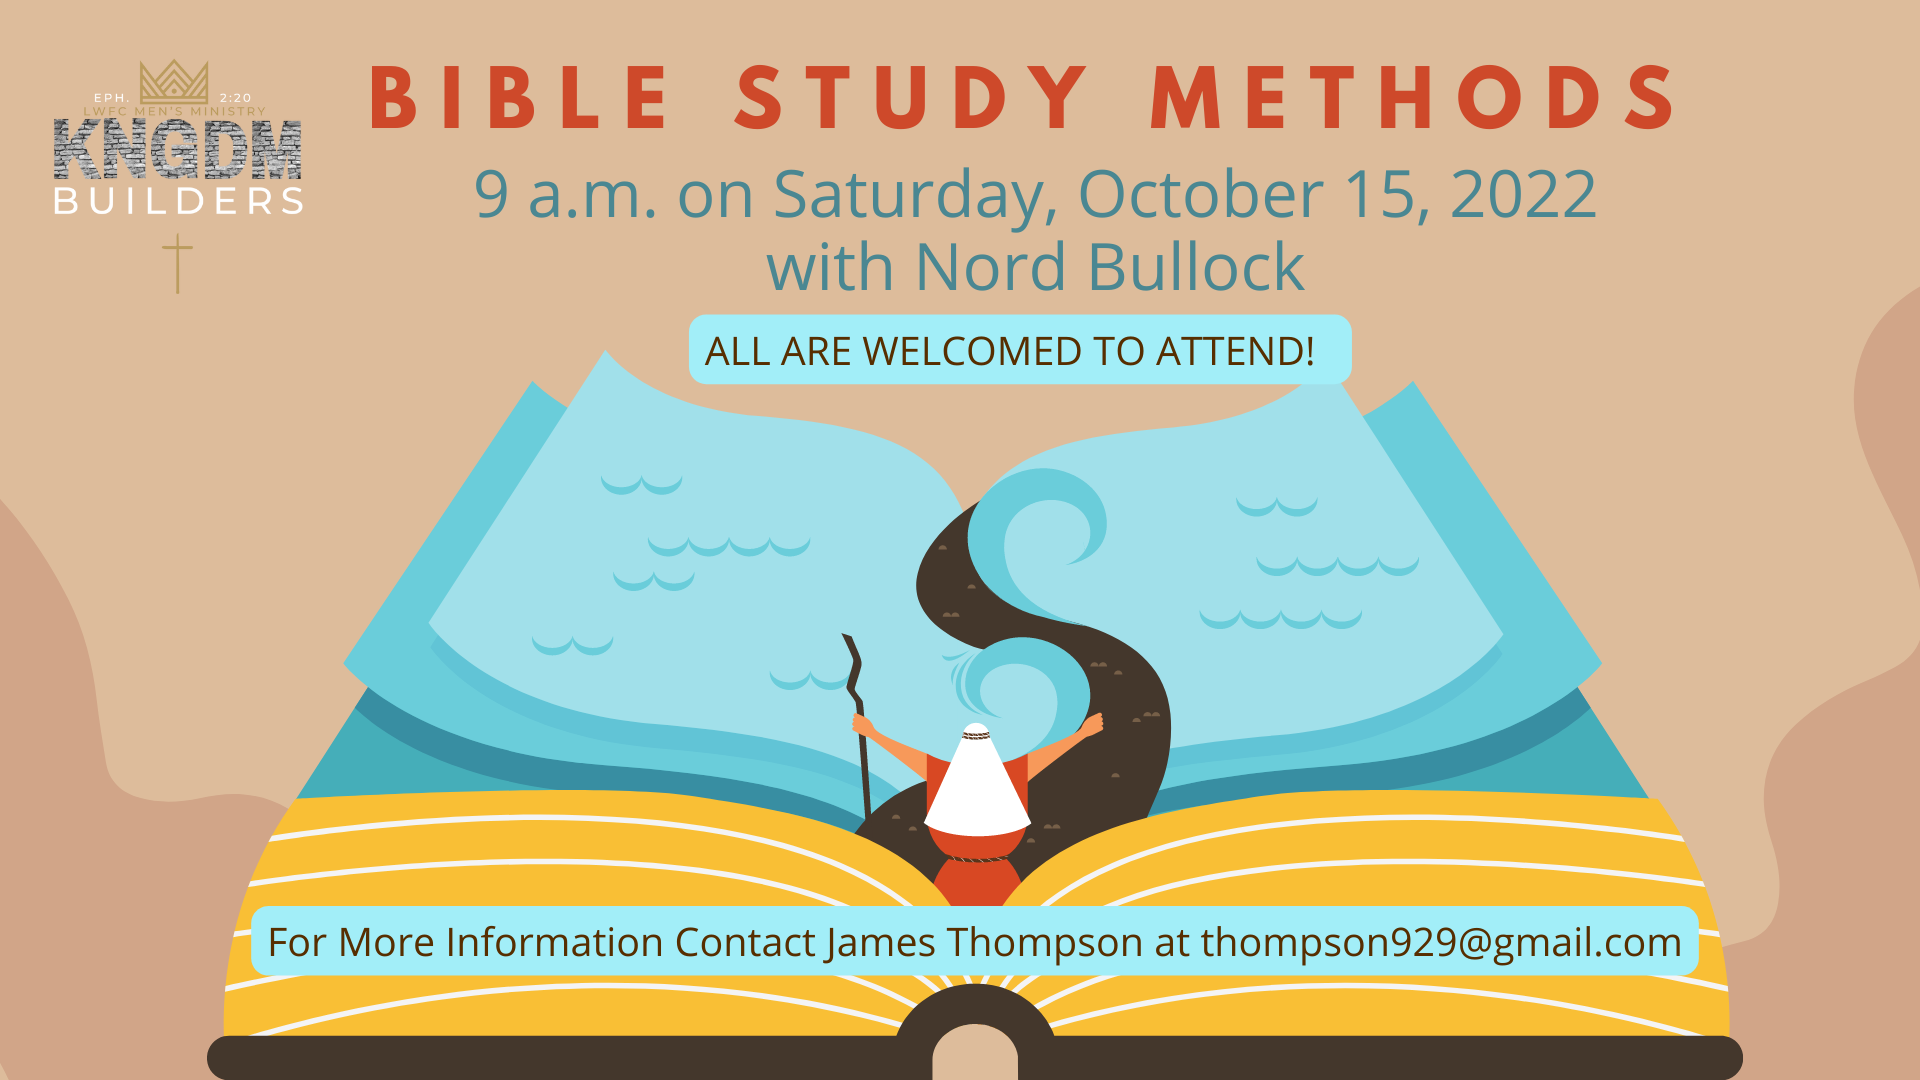 Bible Study Methods – All Are Welcomed To Attend head image